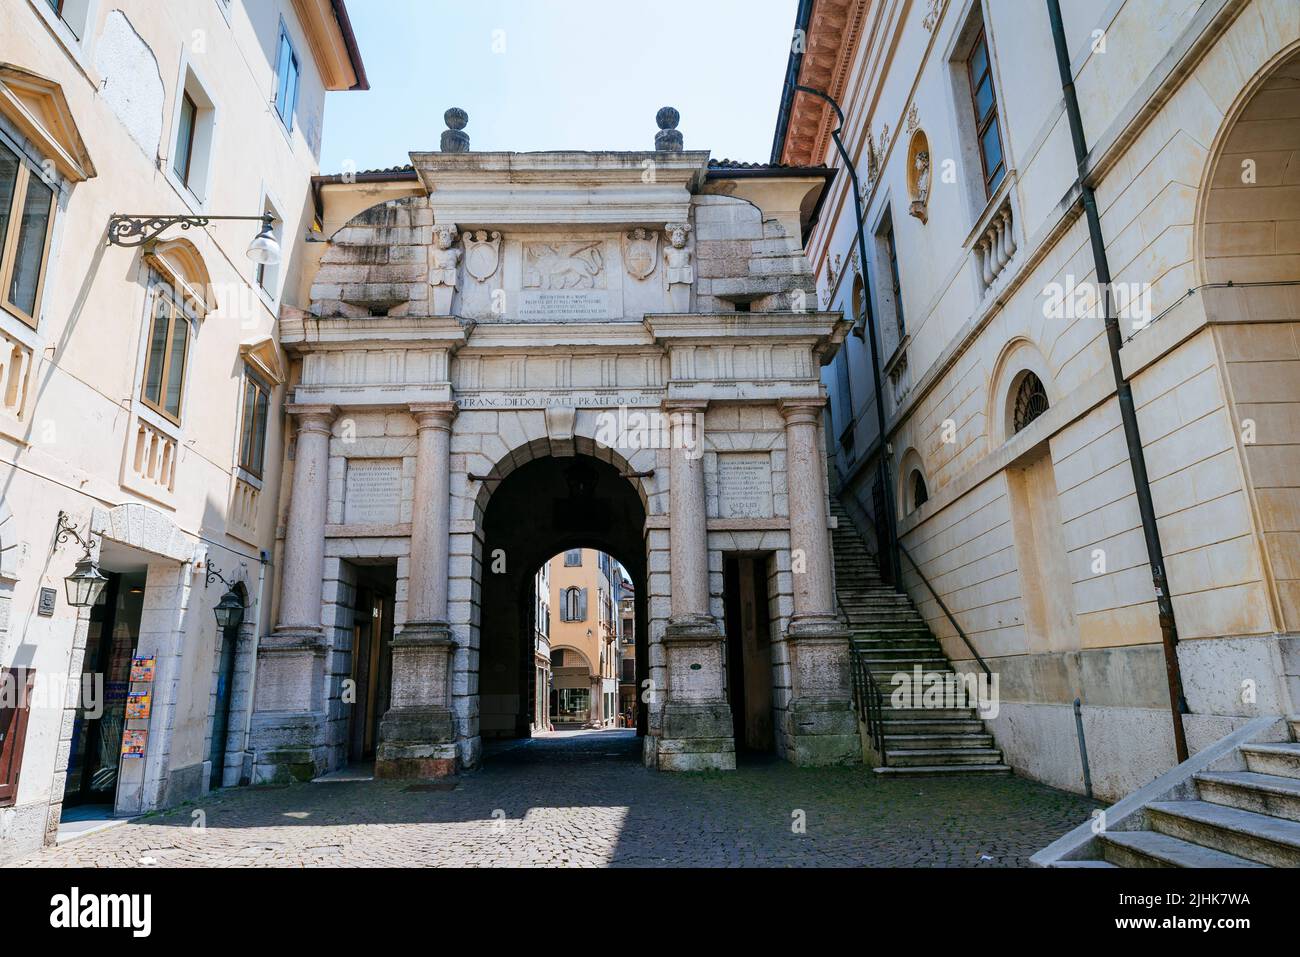 North side. The Dojona gate, porta Dojona, is one of the three gates of the ancient walls of Belluno that have been preserved up to our times. This fa Stock Photo